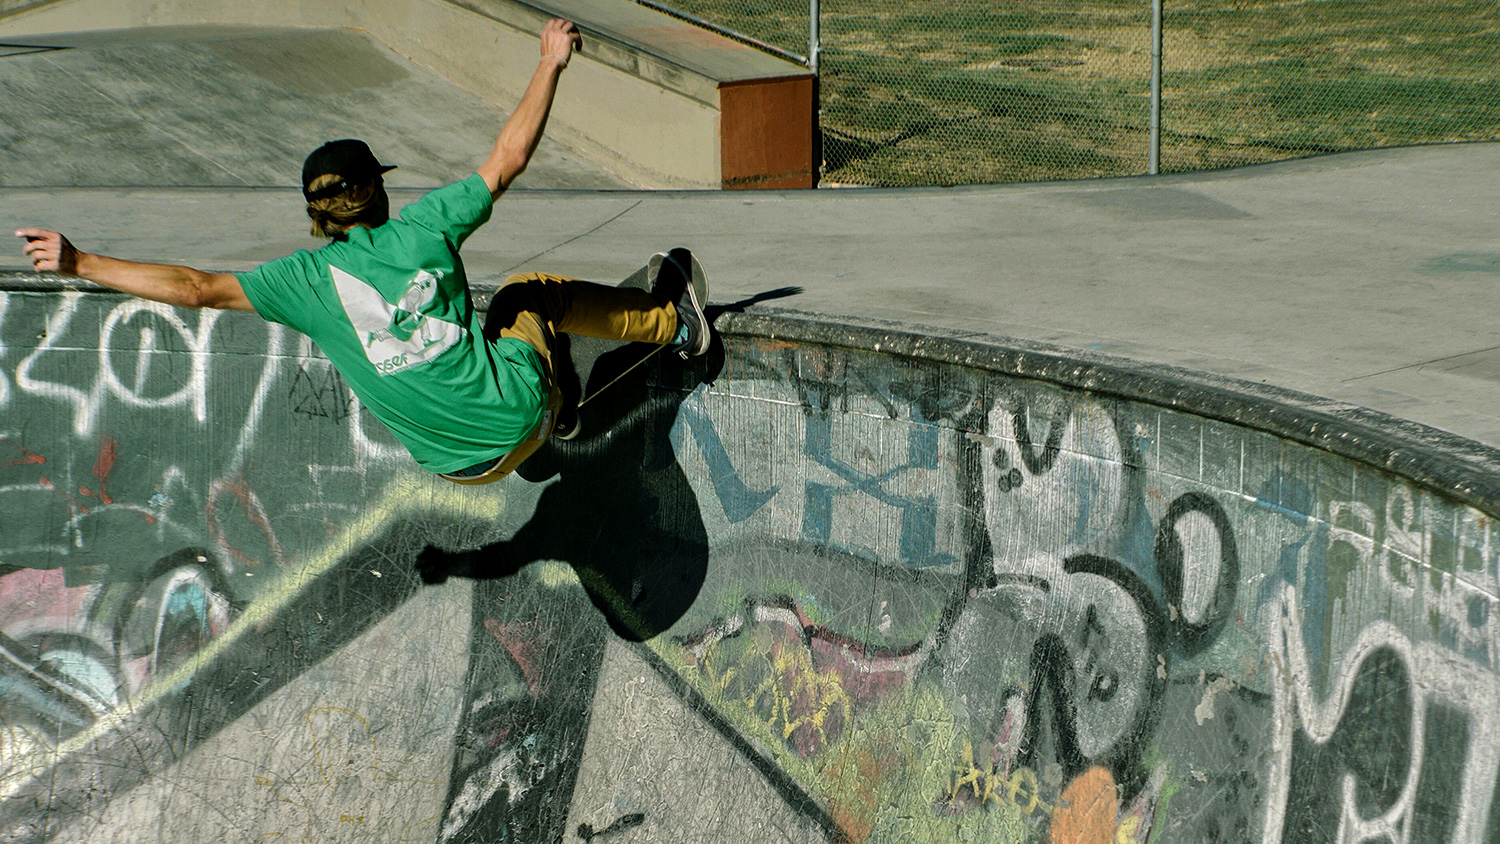 Poole alumnus Keegan Guizard doing a 'frontside grind' at his 'now local' Garvanza Skatepark in Highland Park, Calif.